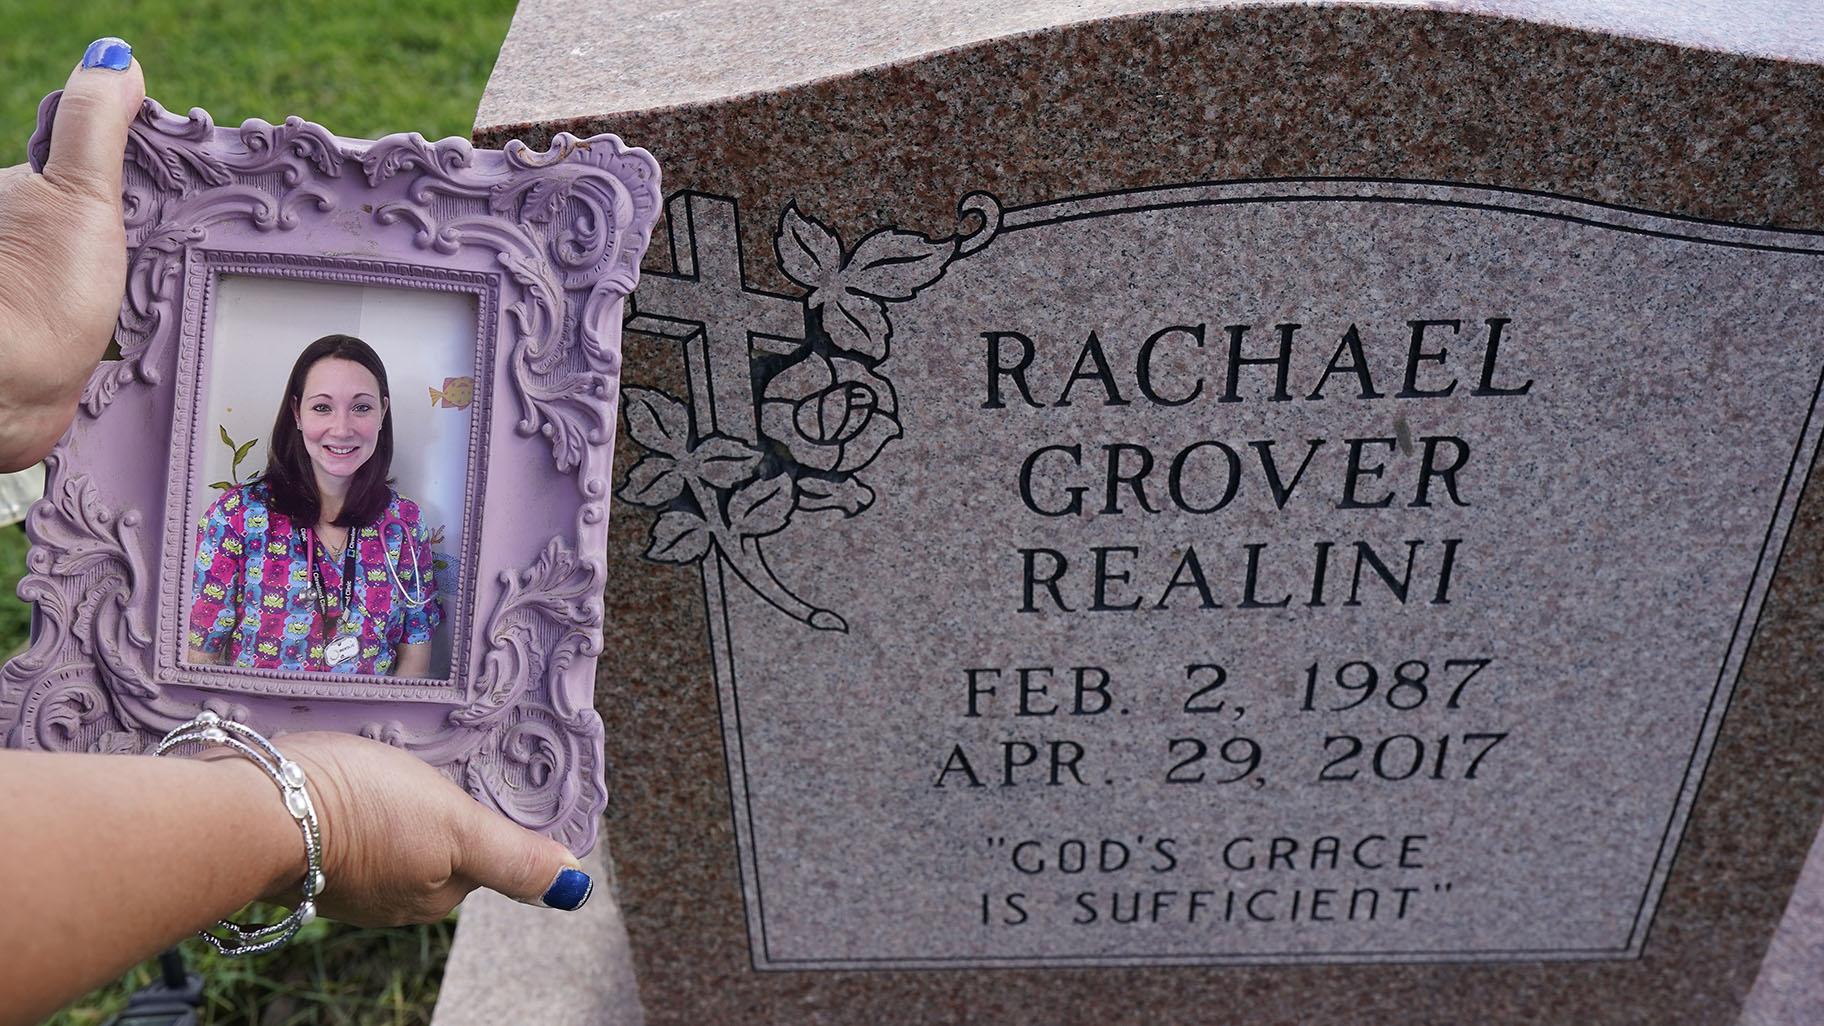 Sharon Grover holds up a photograph of her daughter, Rachael, over the gravesite at Fairview Cemetery, Tuesday, Sept. 28, 2021, in Mesopotamia, Ohio. Grover believes her daughter started using prescription painkillers around 2013 but missed any signs of her addiction as her daughter, the oldest of five children, remained distanced. (AP Photo / Tony Dejak)